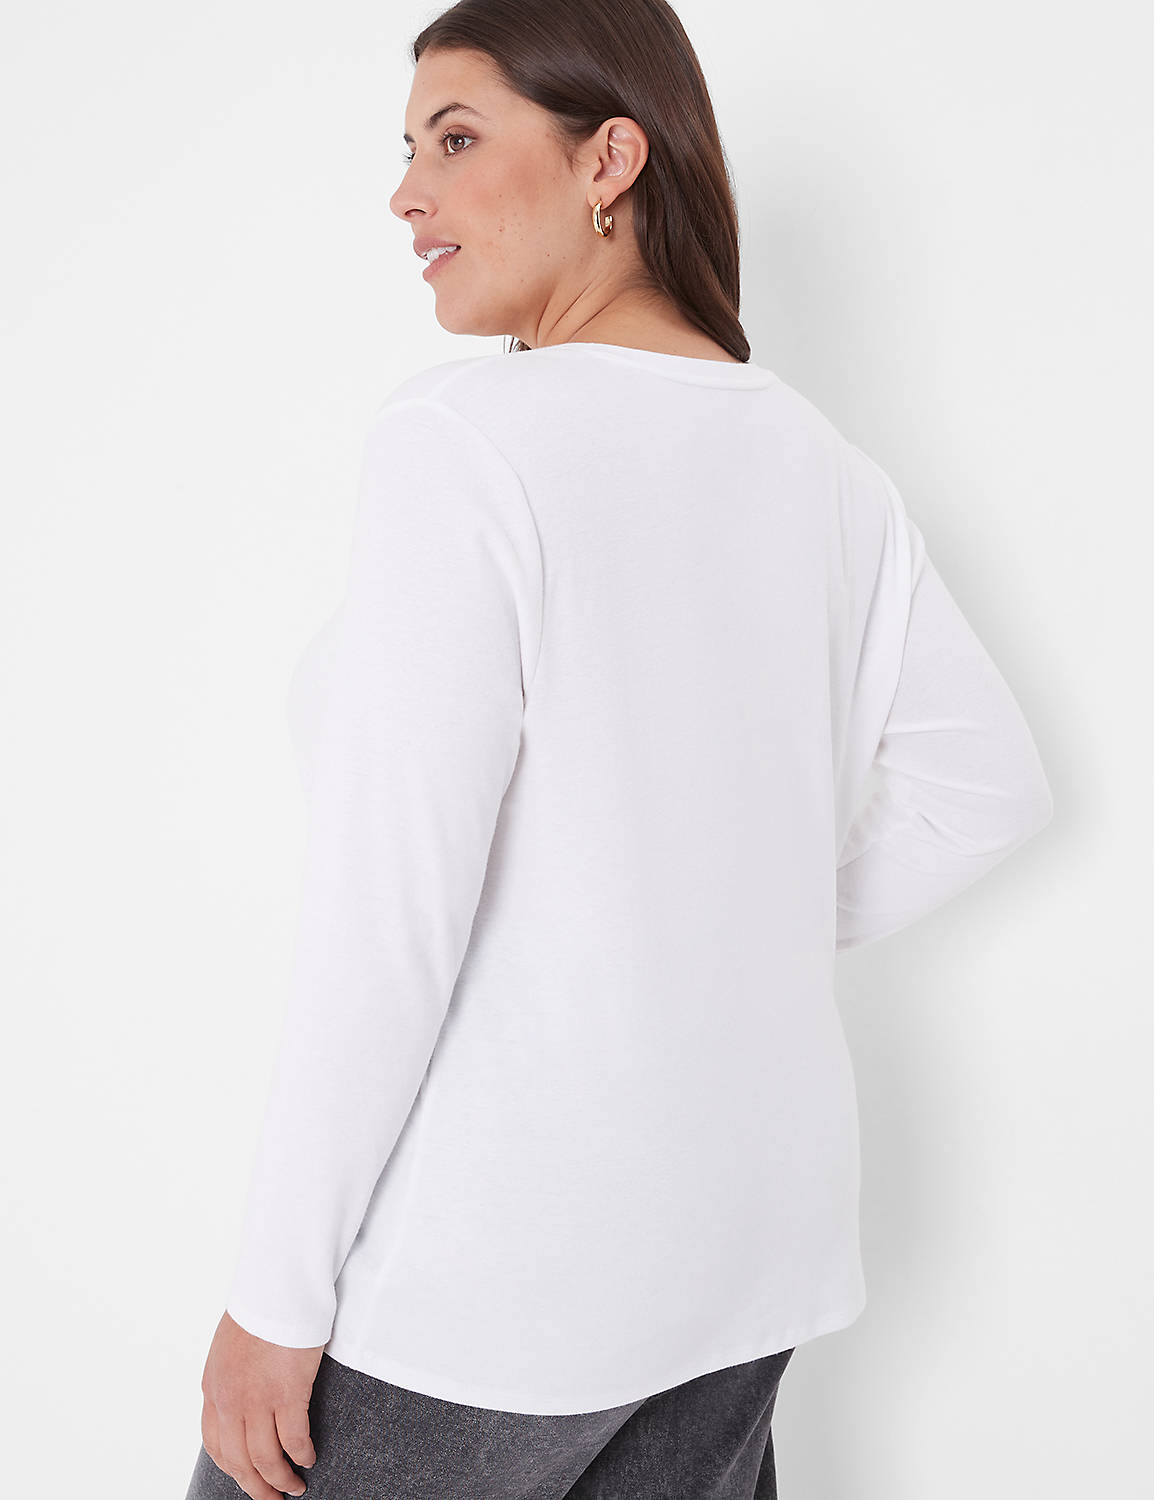 Classic LS V Neck Tee 1138413 Copy Product Image 2